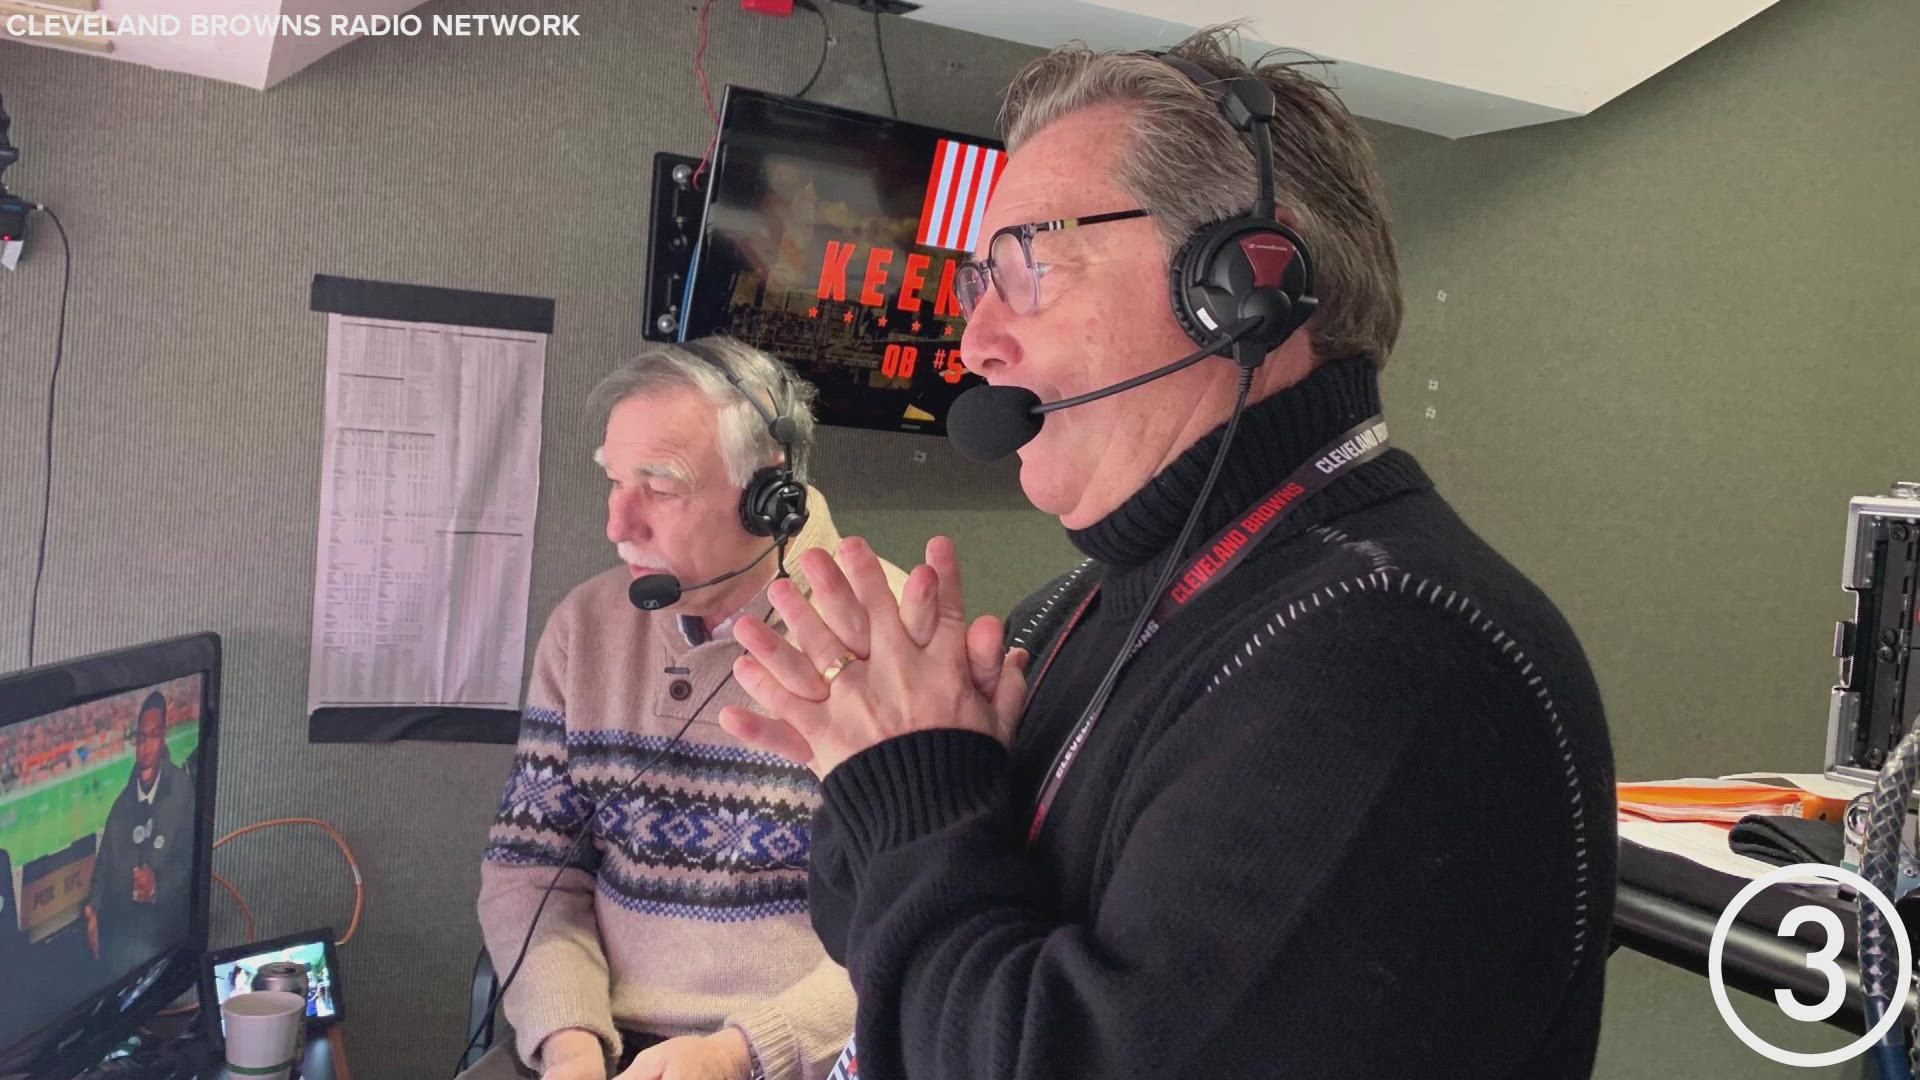 Cleveland Browns radio color analyst Doug Dieken called the final game of his career on Sunday.